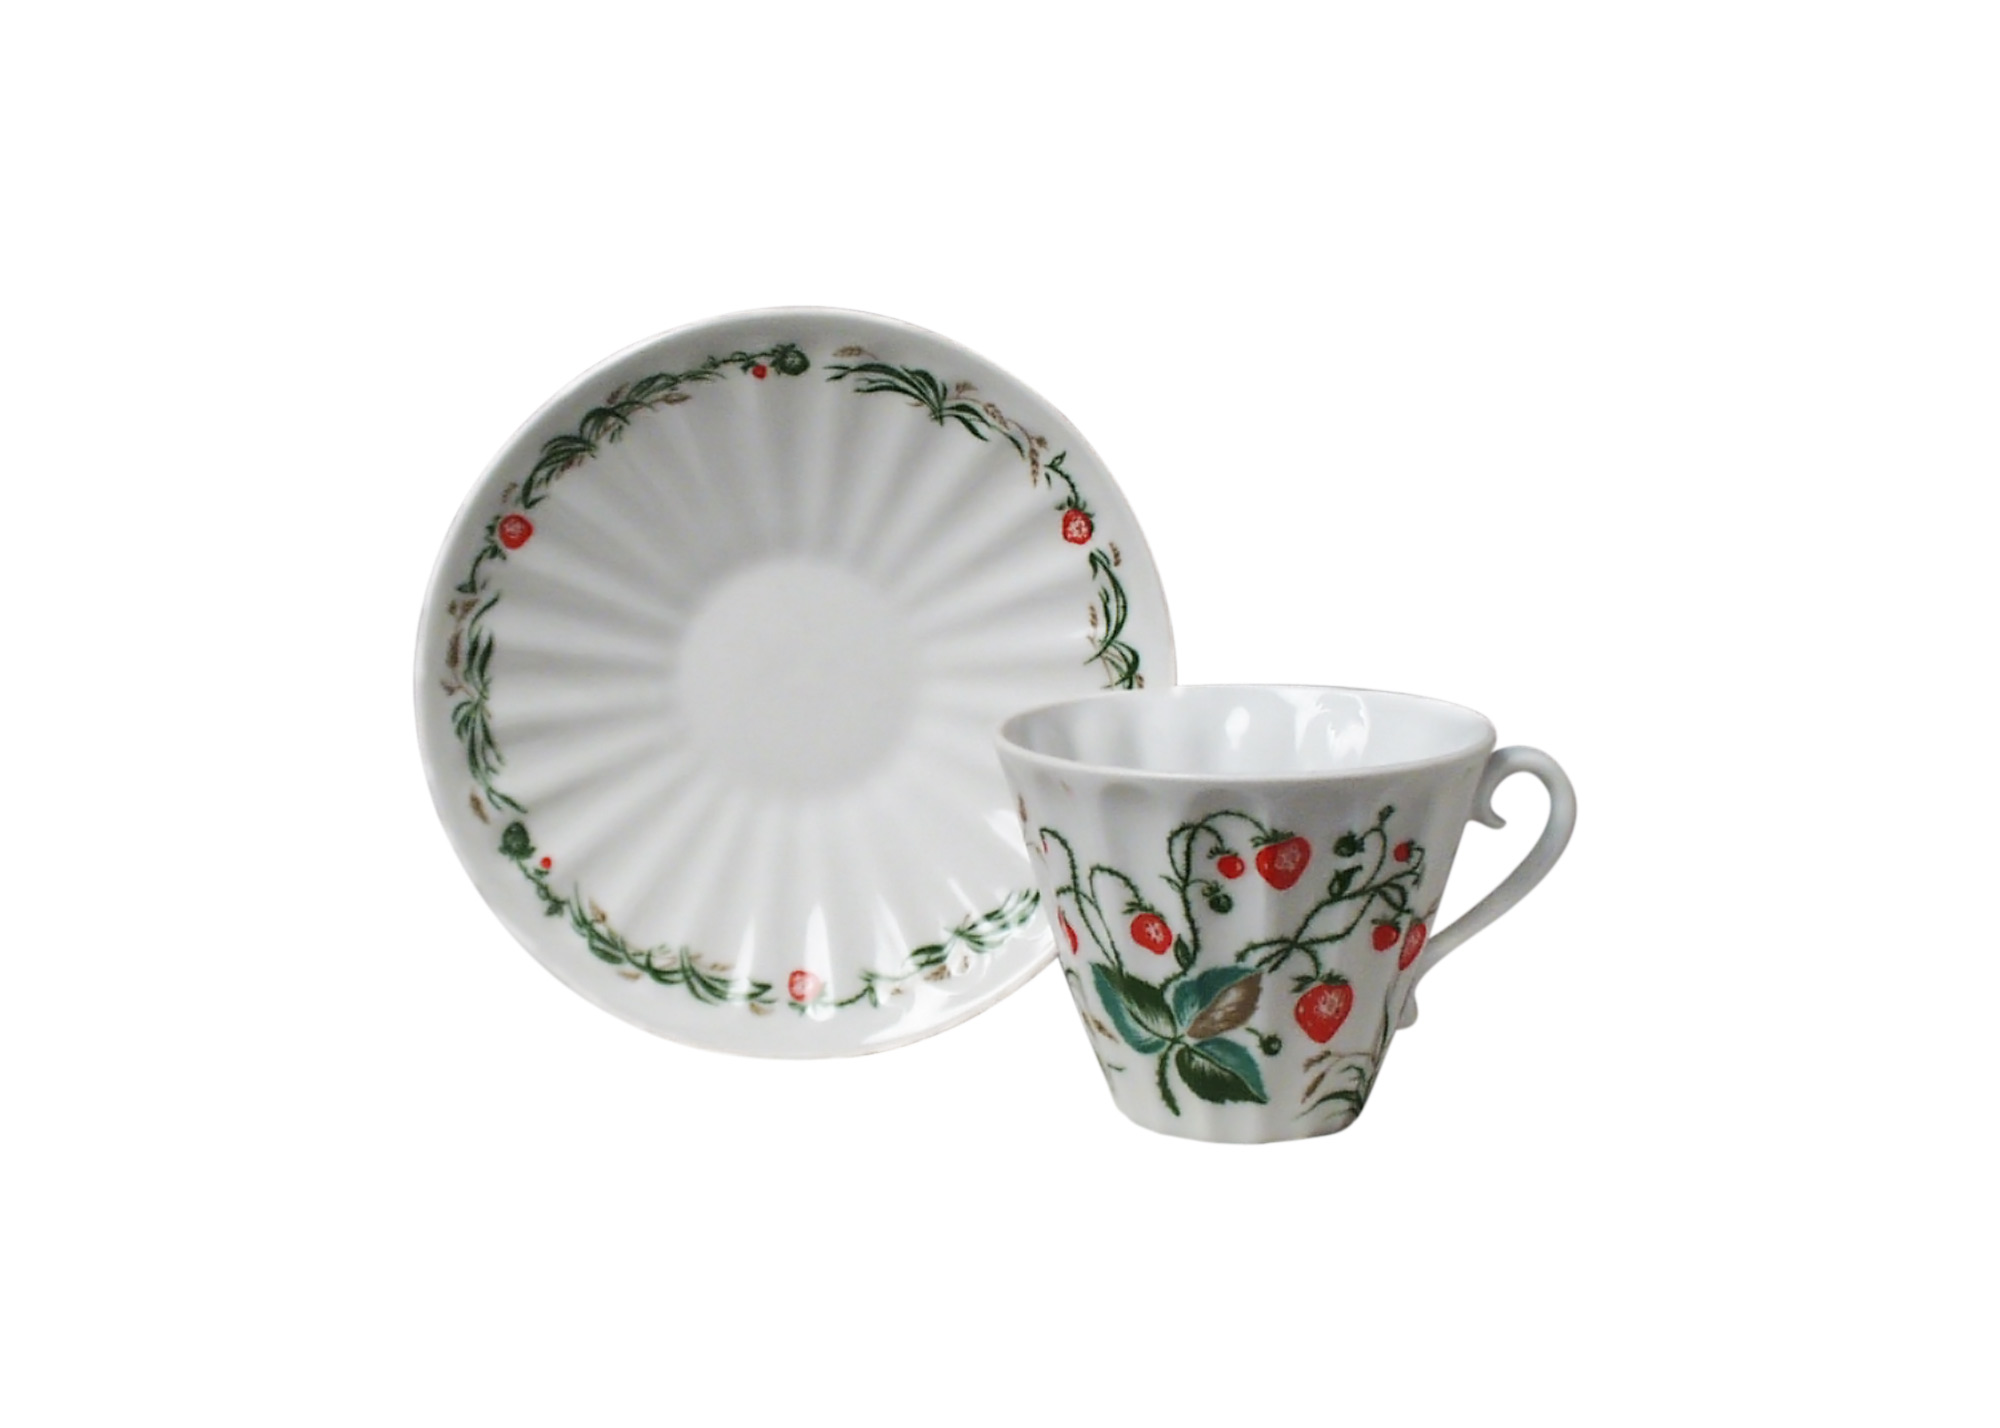 Buy Strawberry Cup and Saucer at GoldenCockerel.com